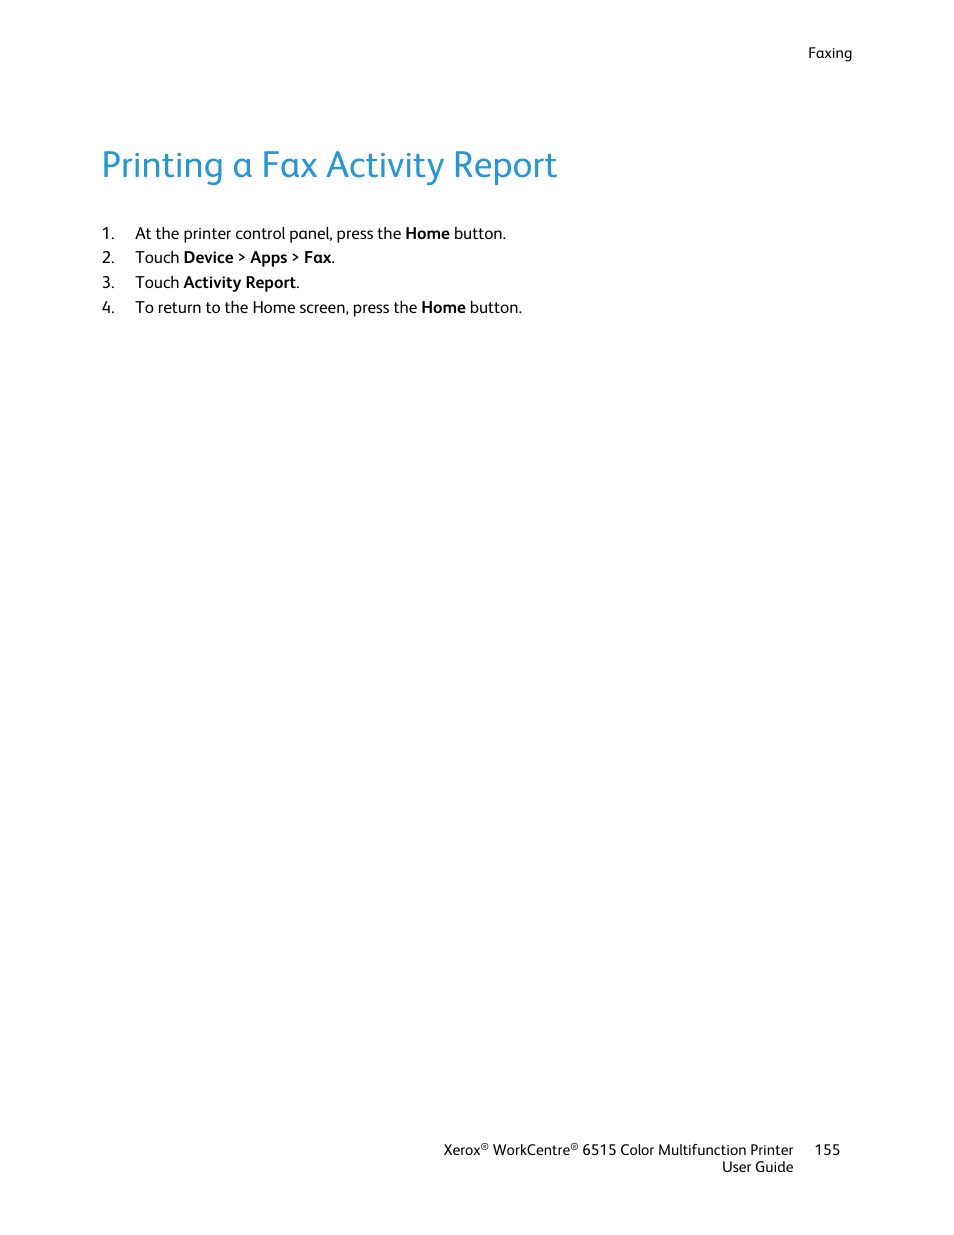 Printing a fax activity report | Xerox WorkCentre 6515DNI User Manual | Page 155 / 326